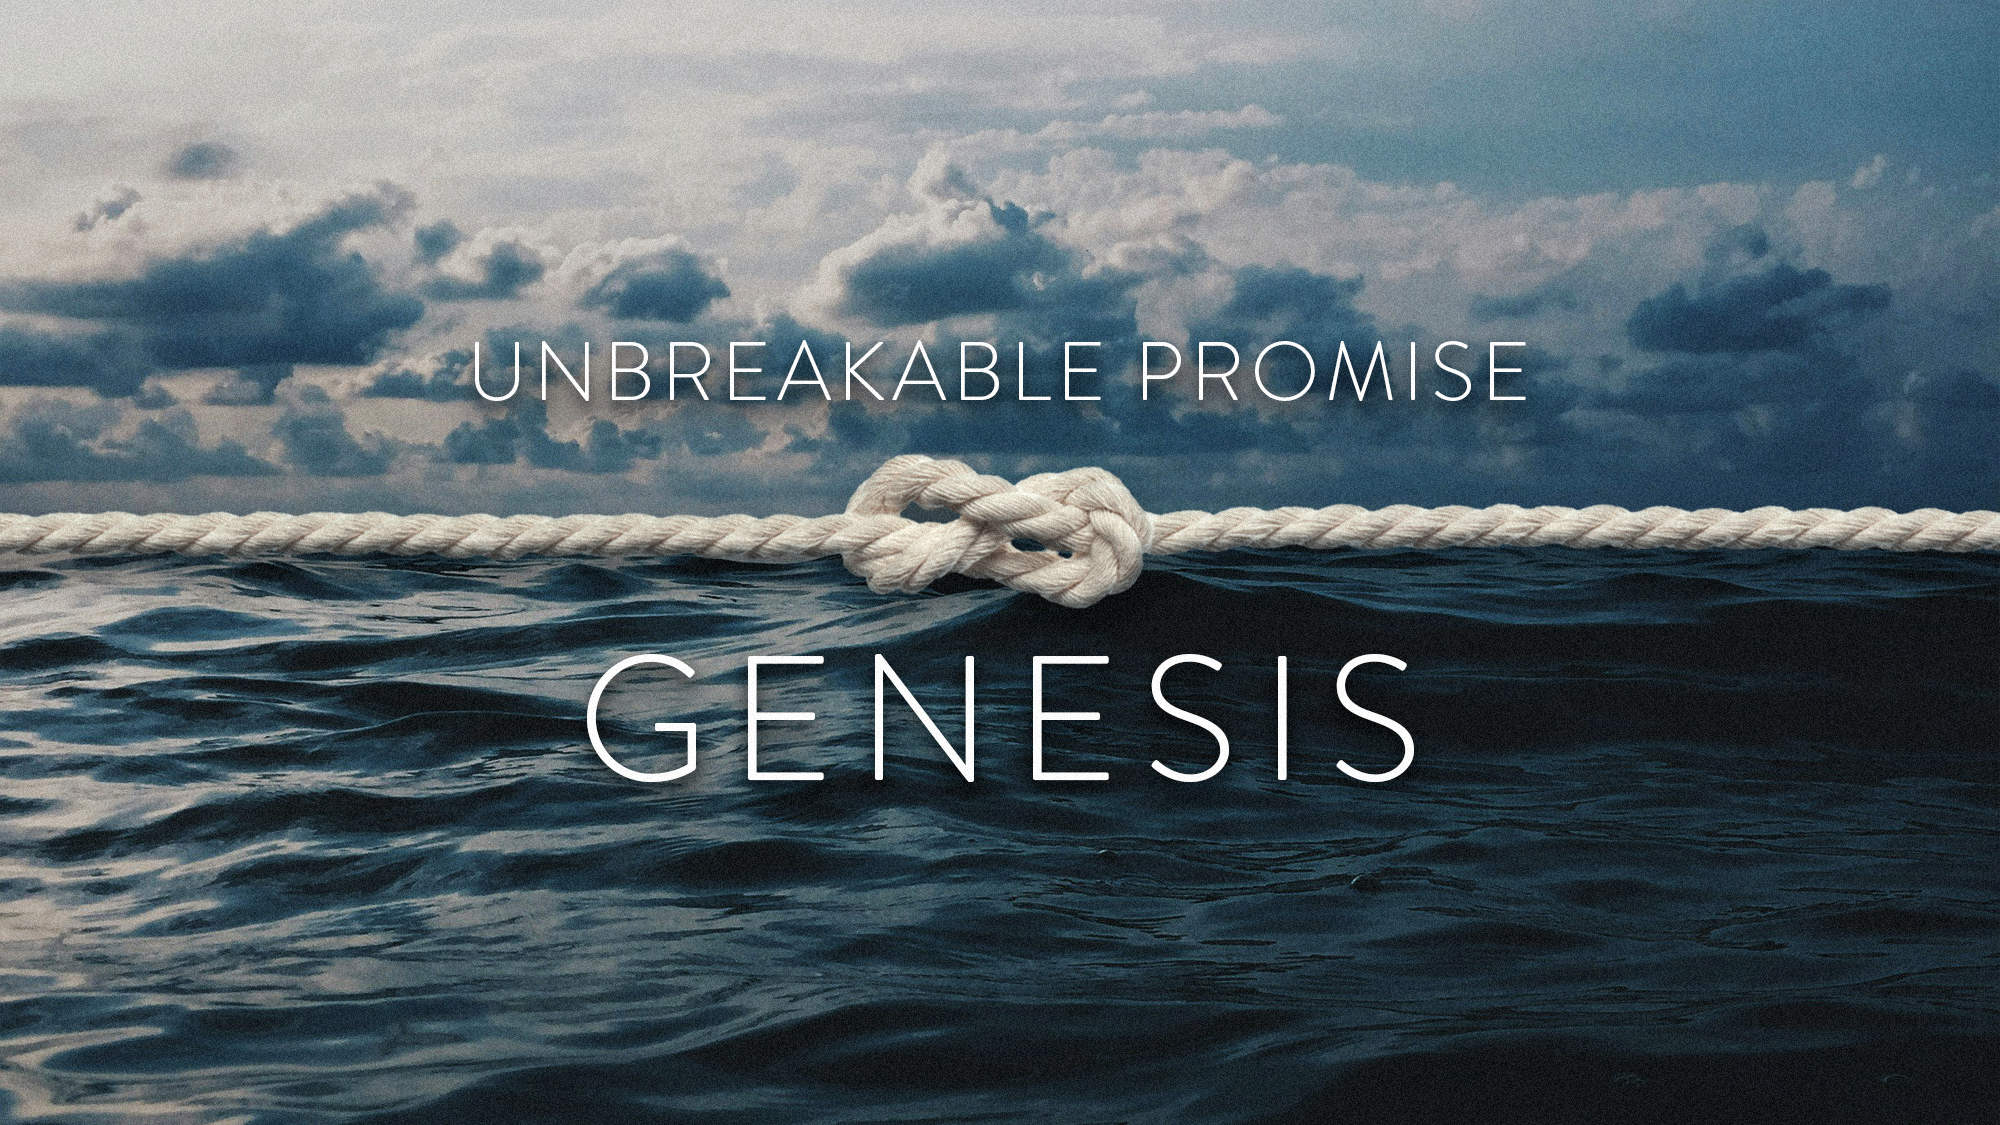 Unbreakable promise: of judgment & rescue